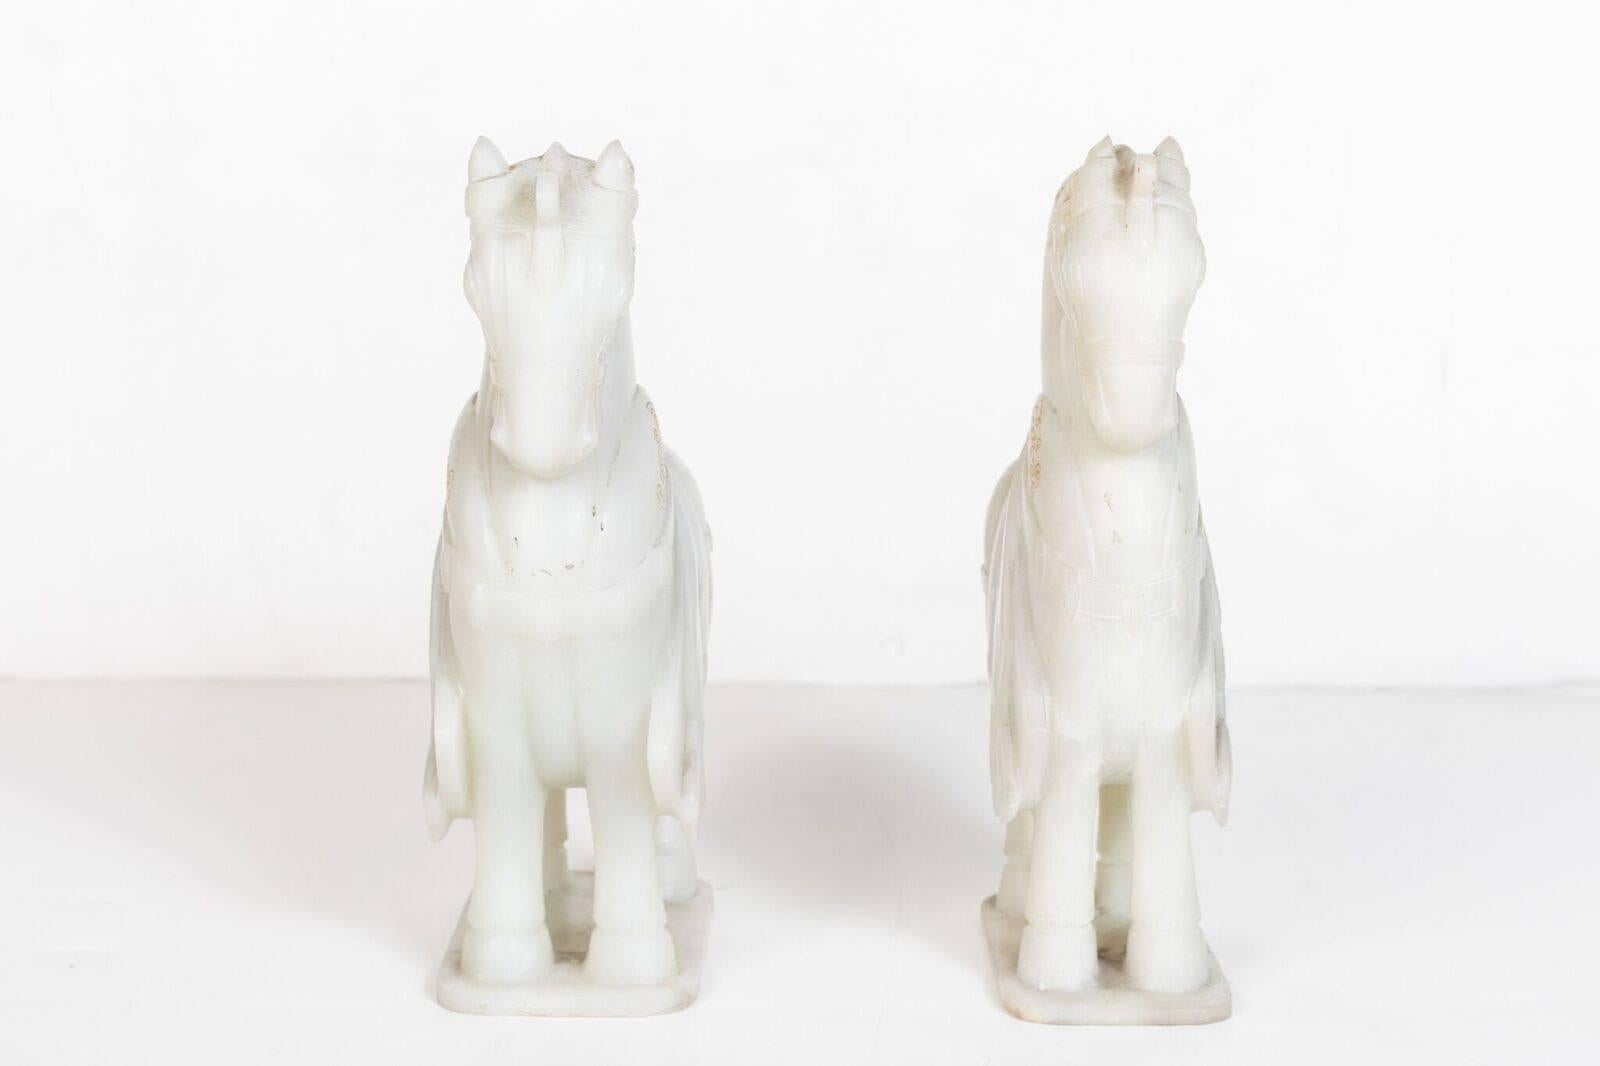 Pair of elegant, hand-carved, white hardstone, Chinese horses with gilded details. Each outfitted with saddles, bridles and featuring braided rolled tails.